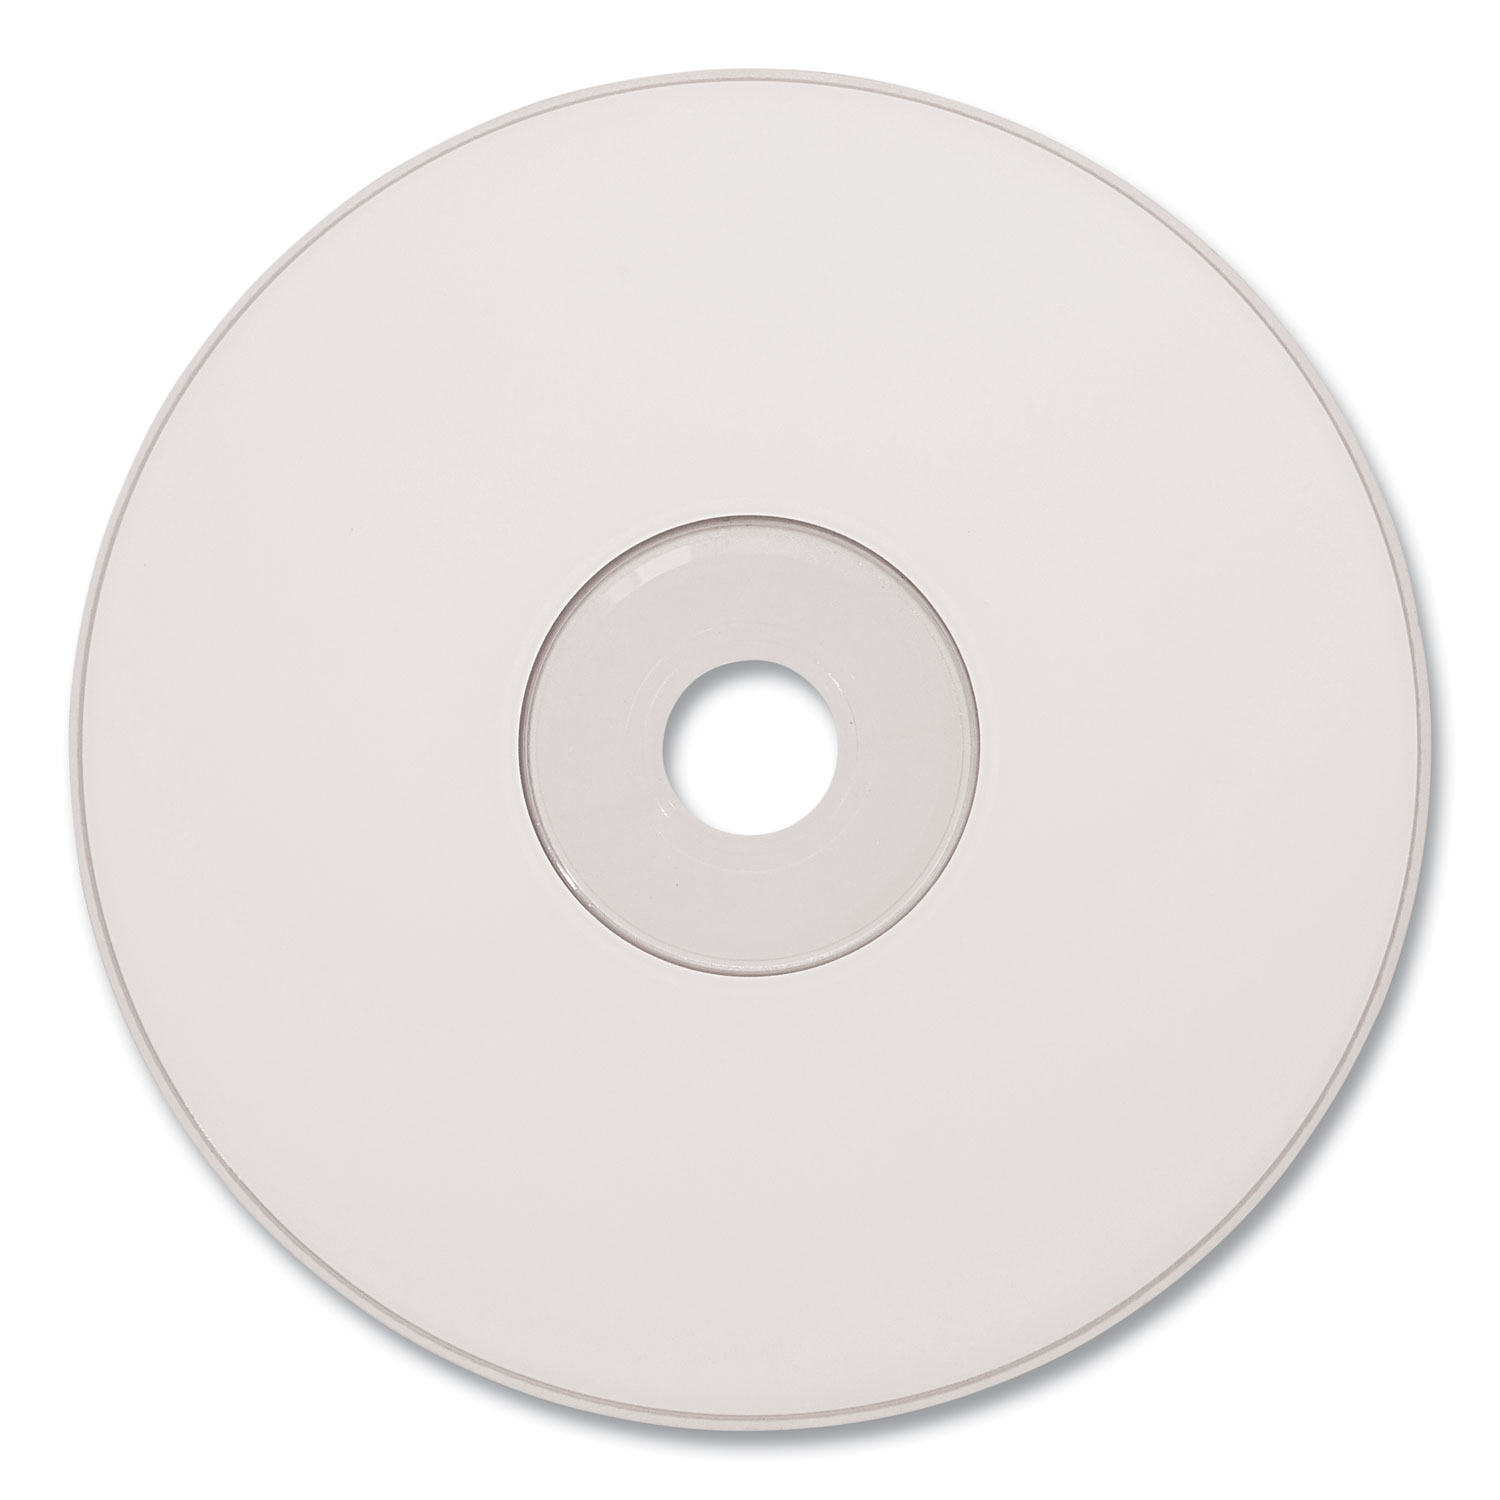 CD-R DataLifePlus Printable Recordable Disc, 700 MB/80 min, 52x, Spindle,  White, 100/Pack - usbpt.com